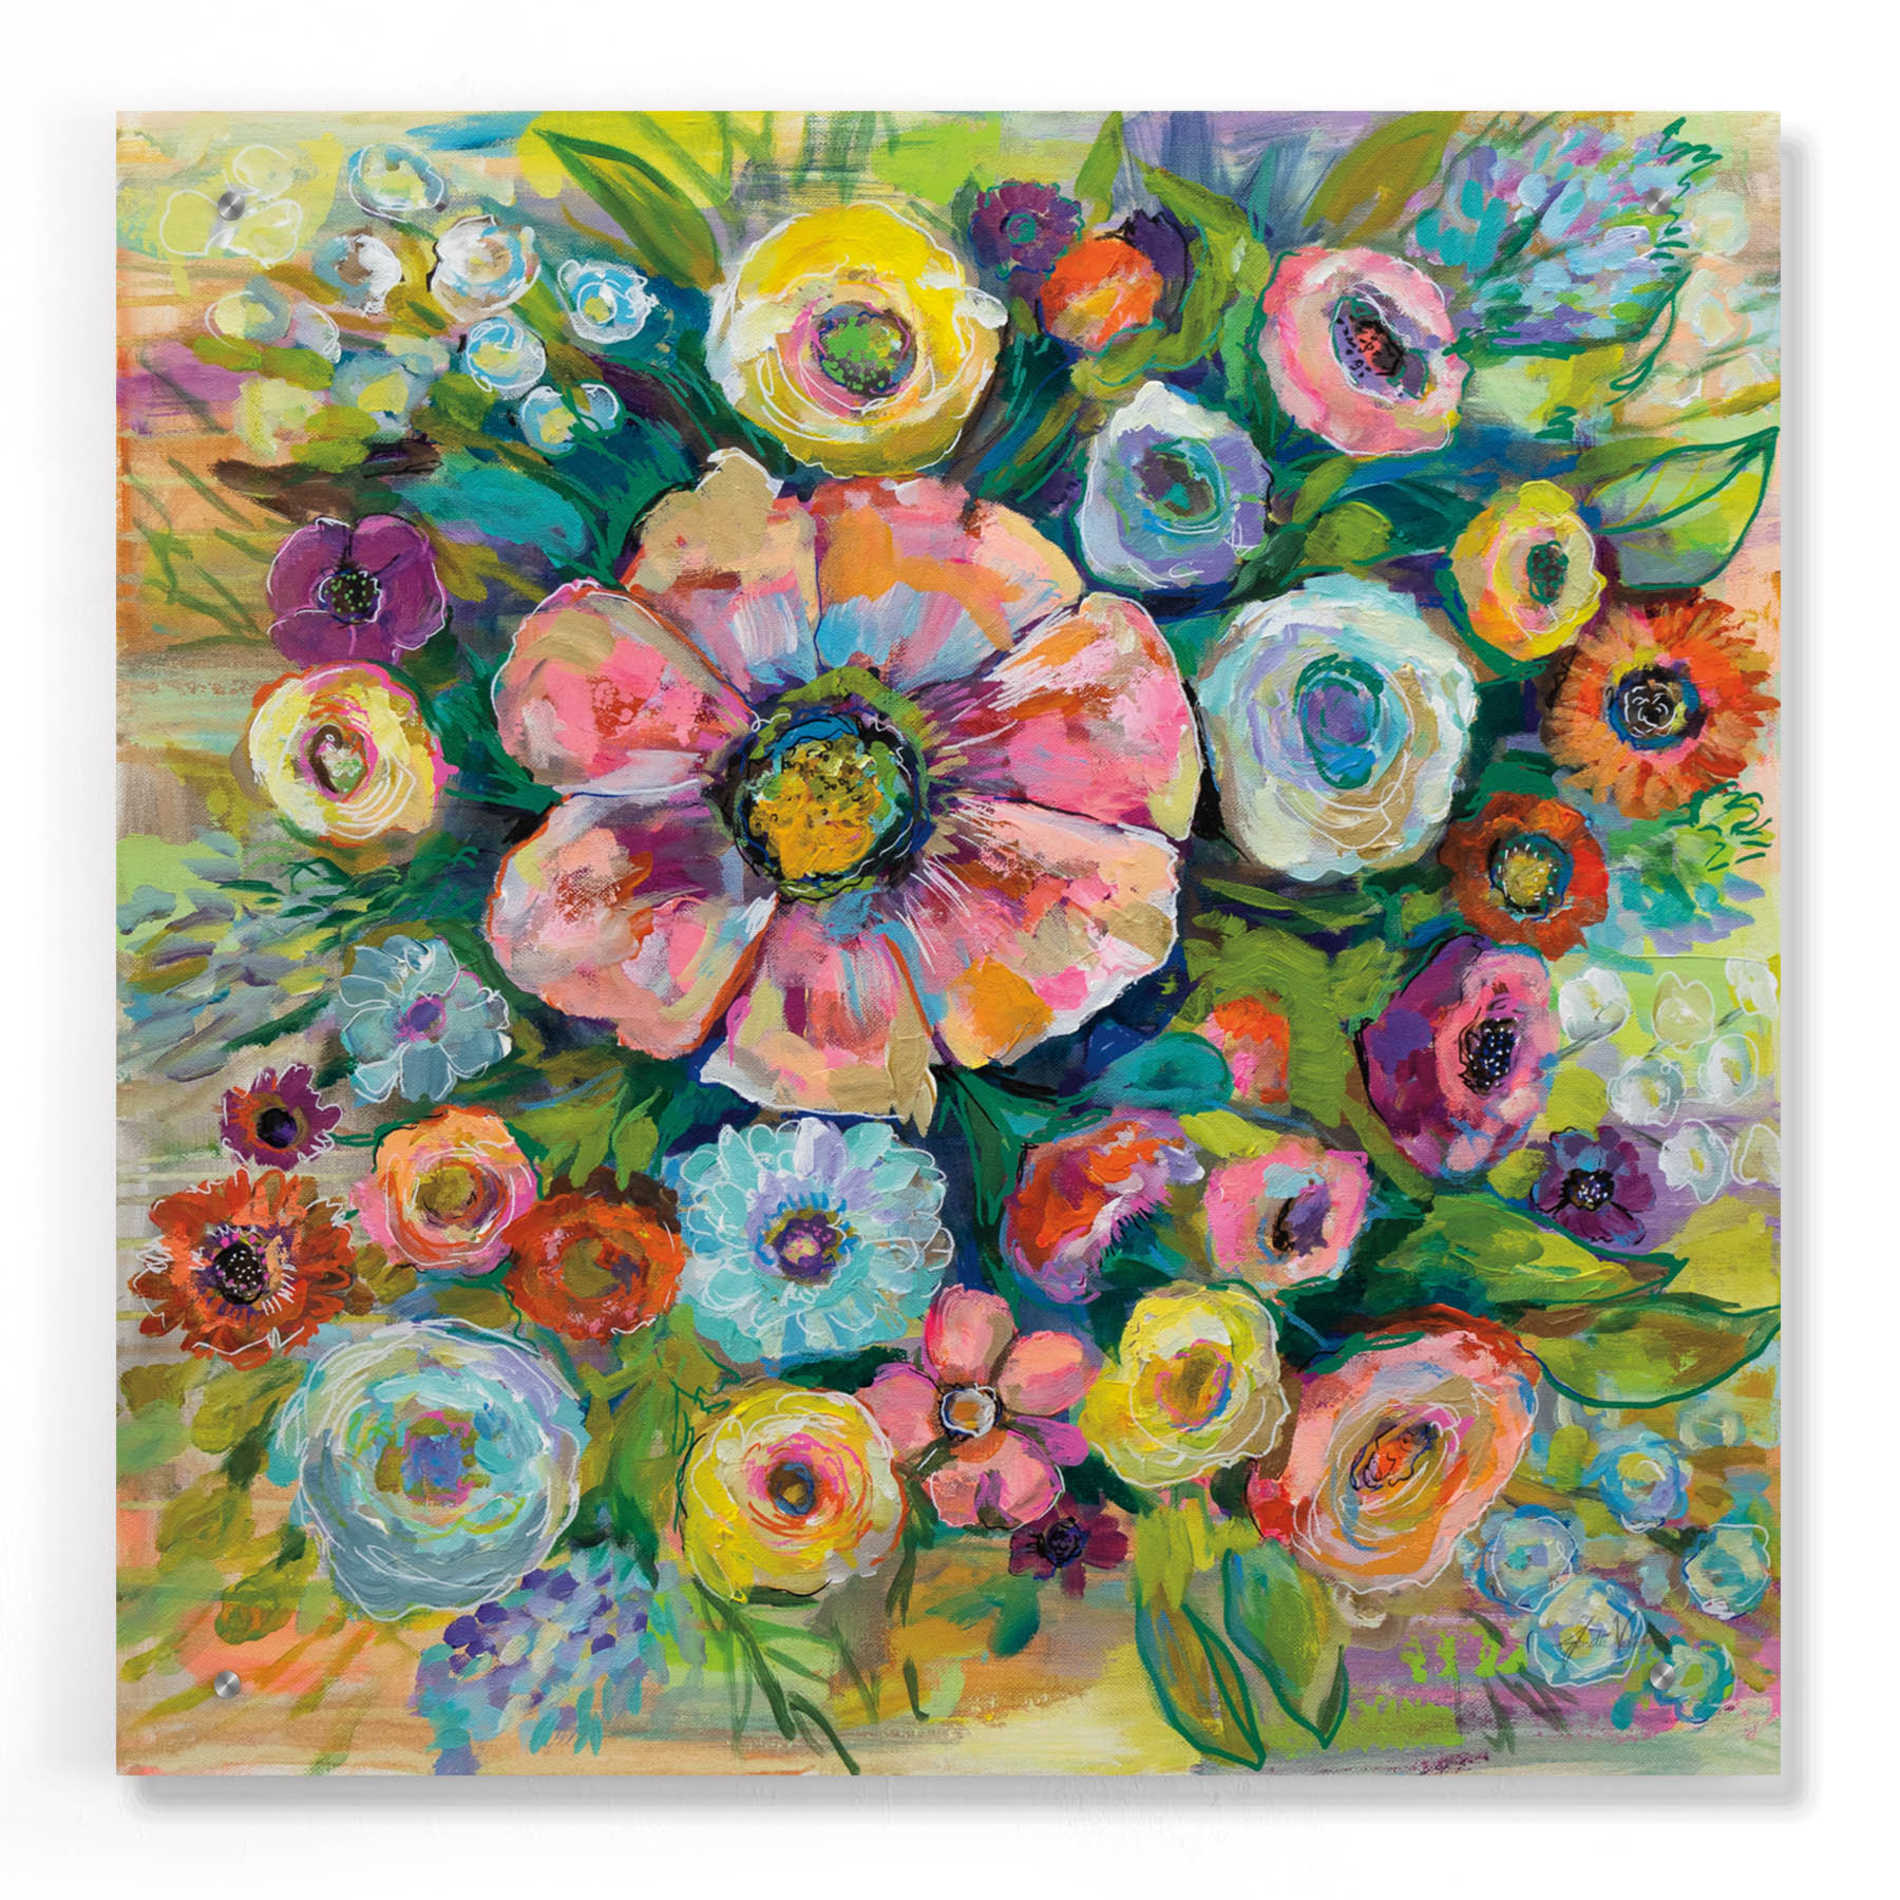 Epic Art 'Floral Fireworks' by Jeanette Vertentes, Acrylic Glass Wall Art,24x24